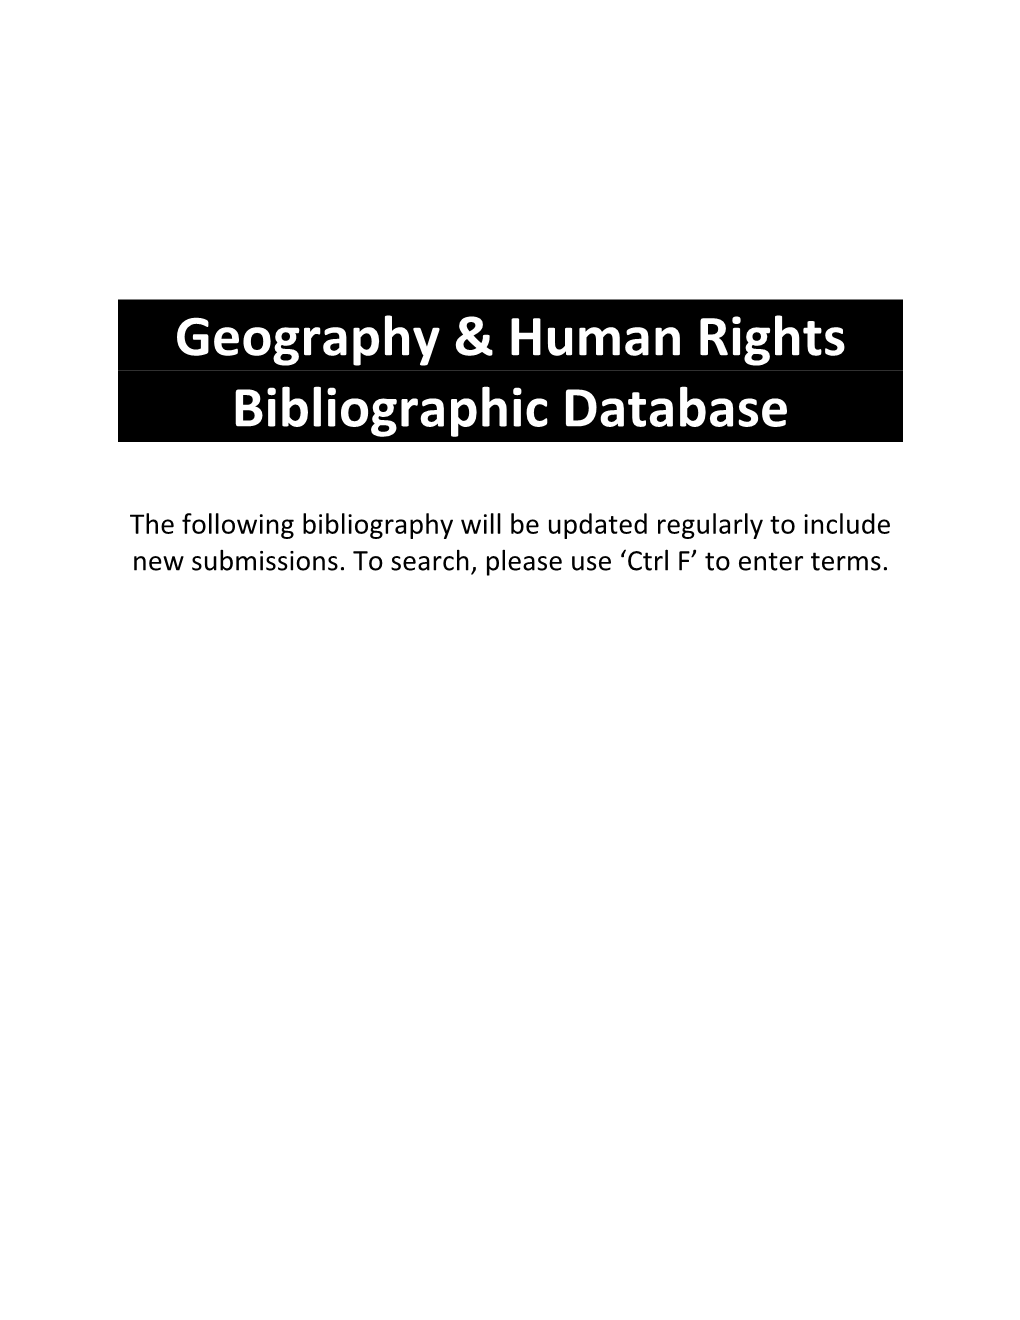 Geography & Human Rights Bibliographic Database